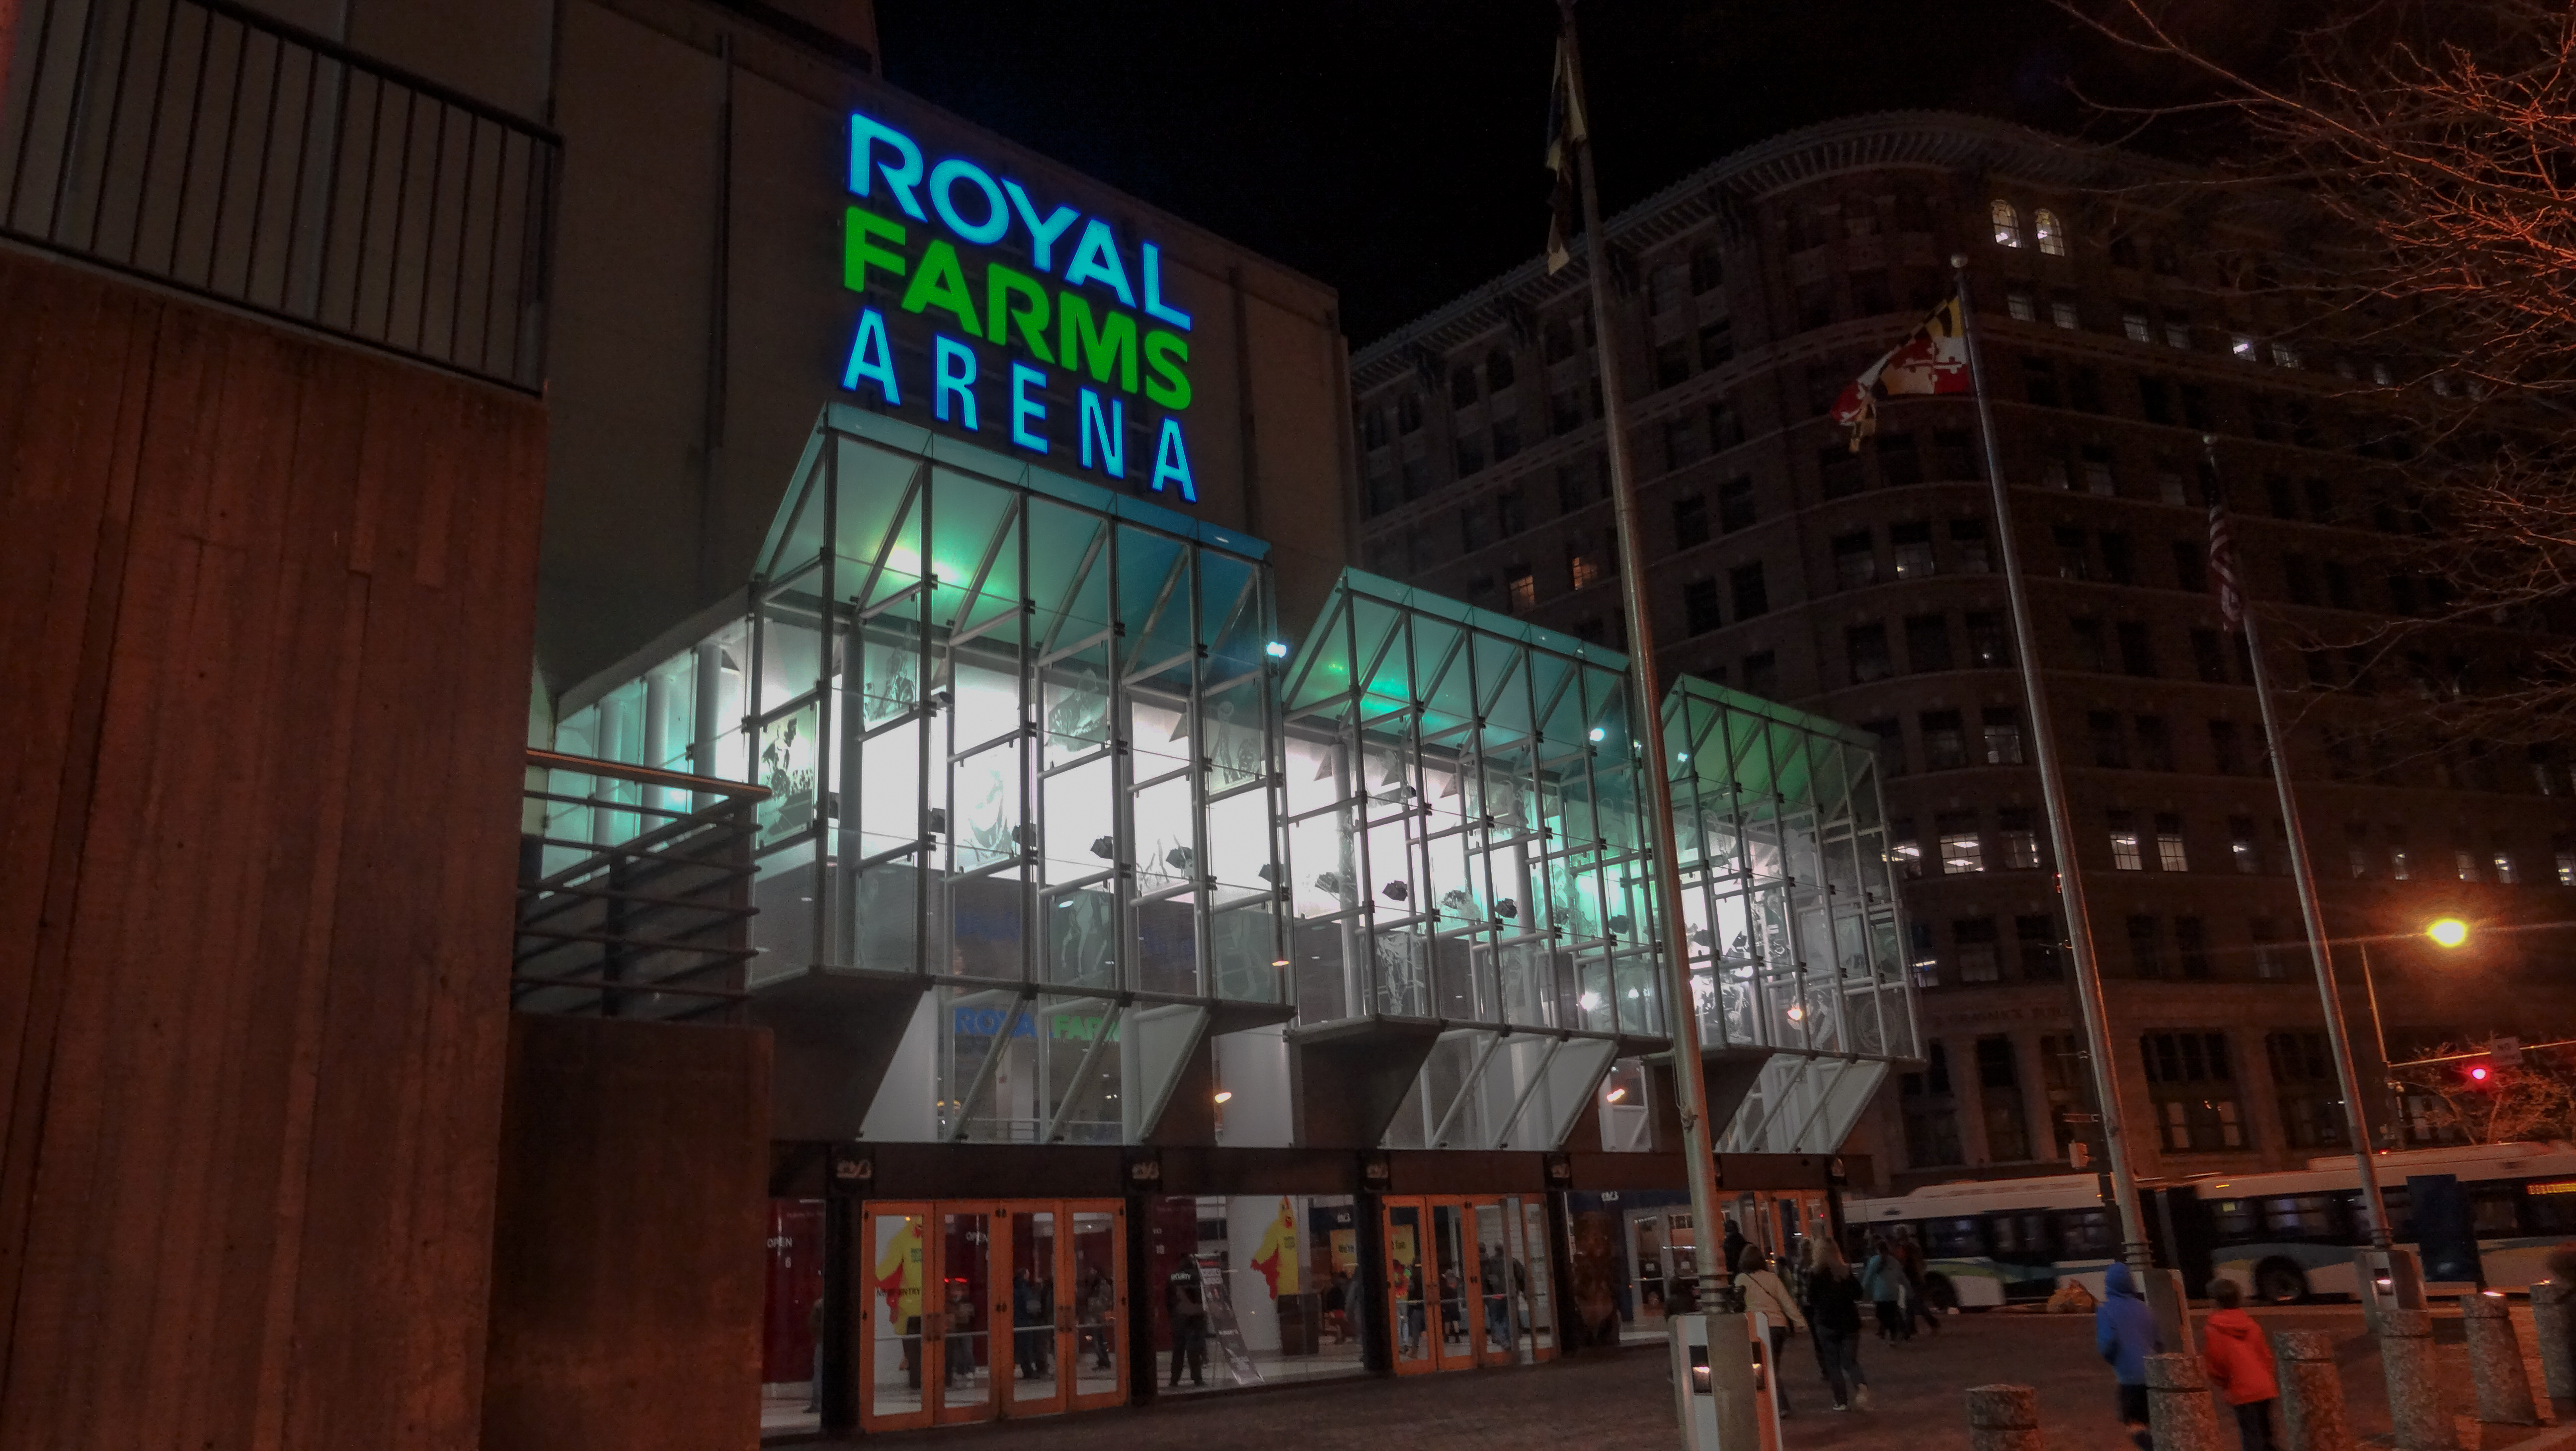 royal farms arena twitter